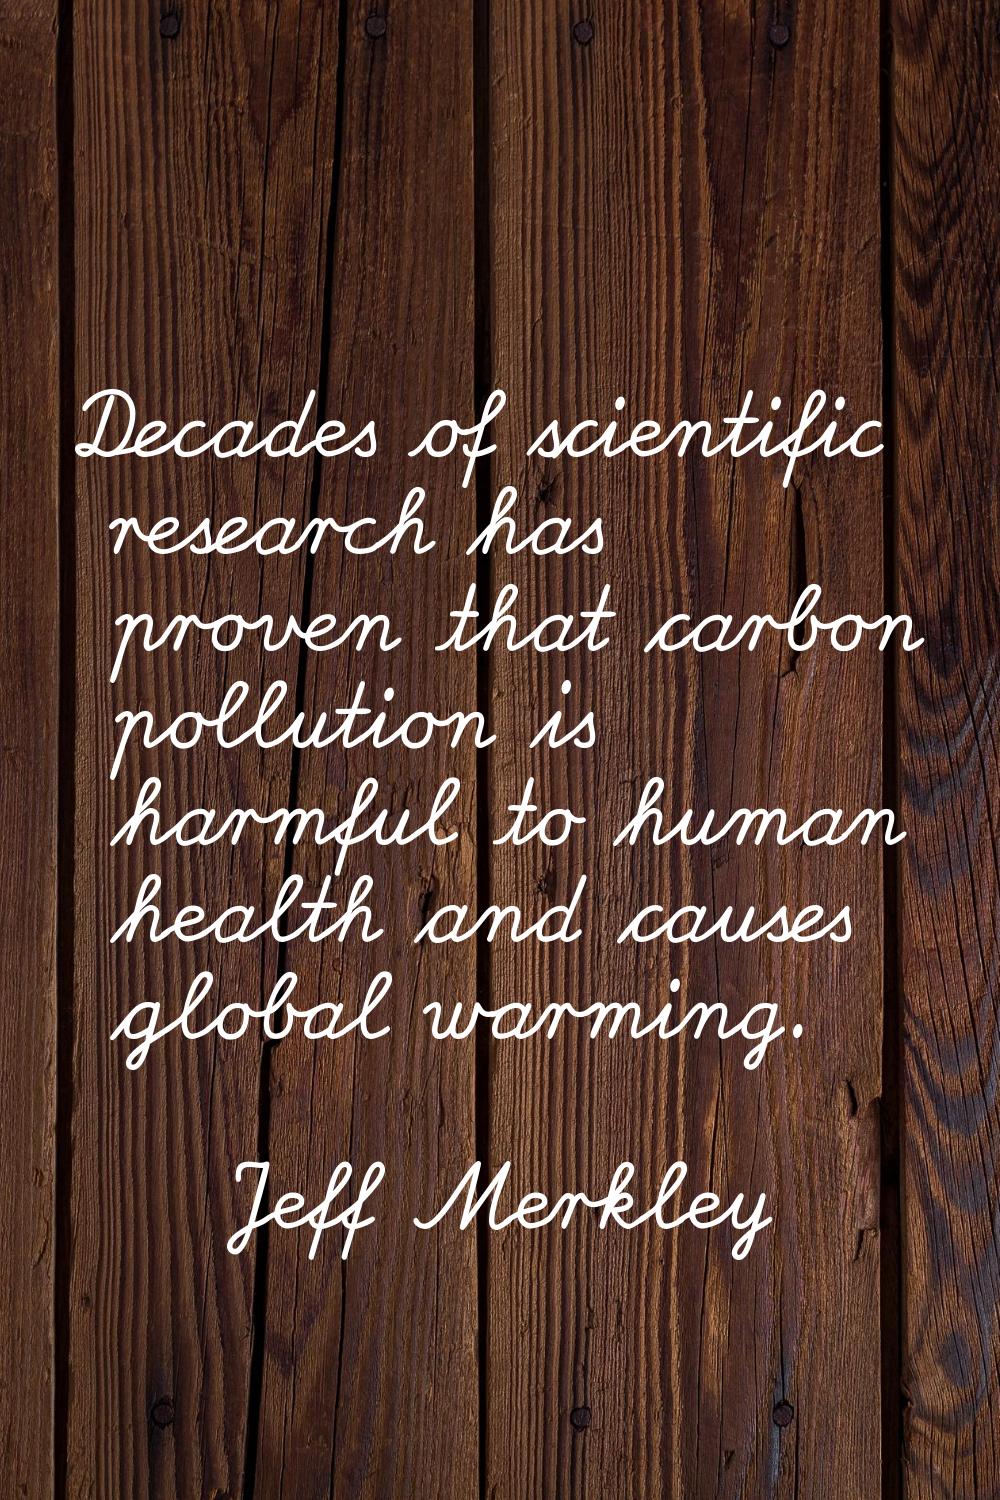 Decades of scientific research has proven that carbon pollution is harmful to human health and caus